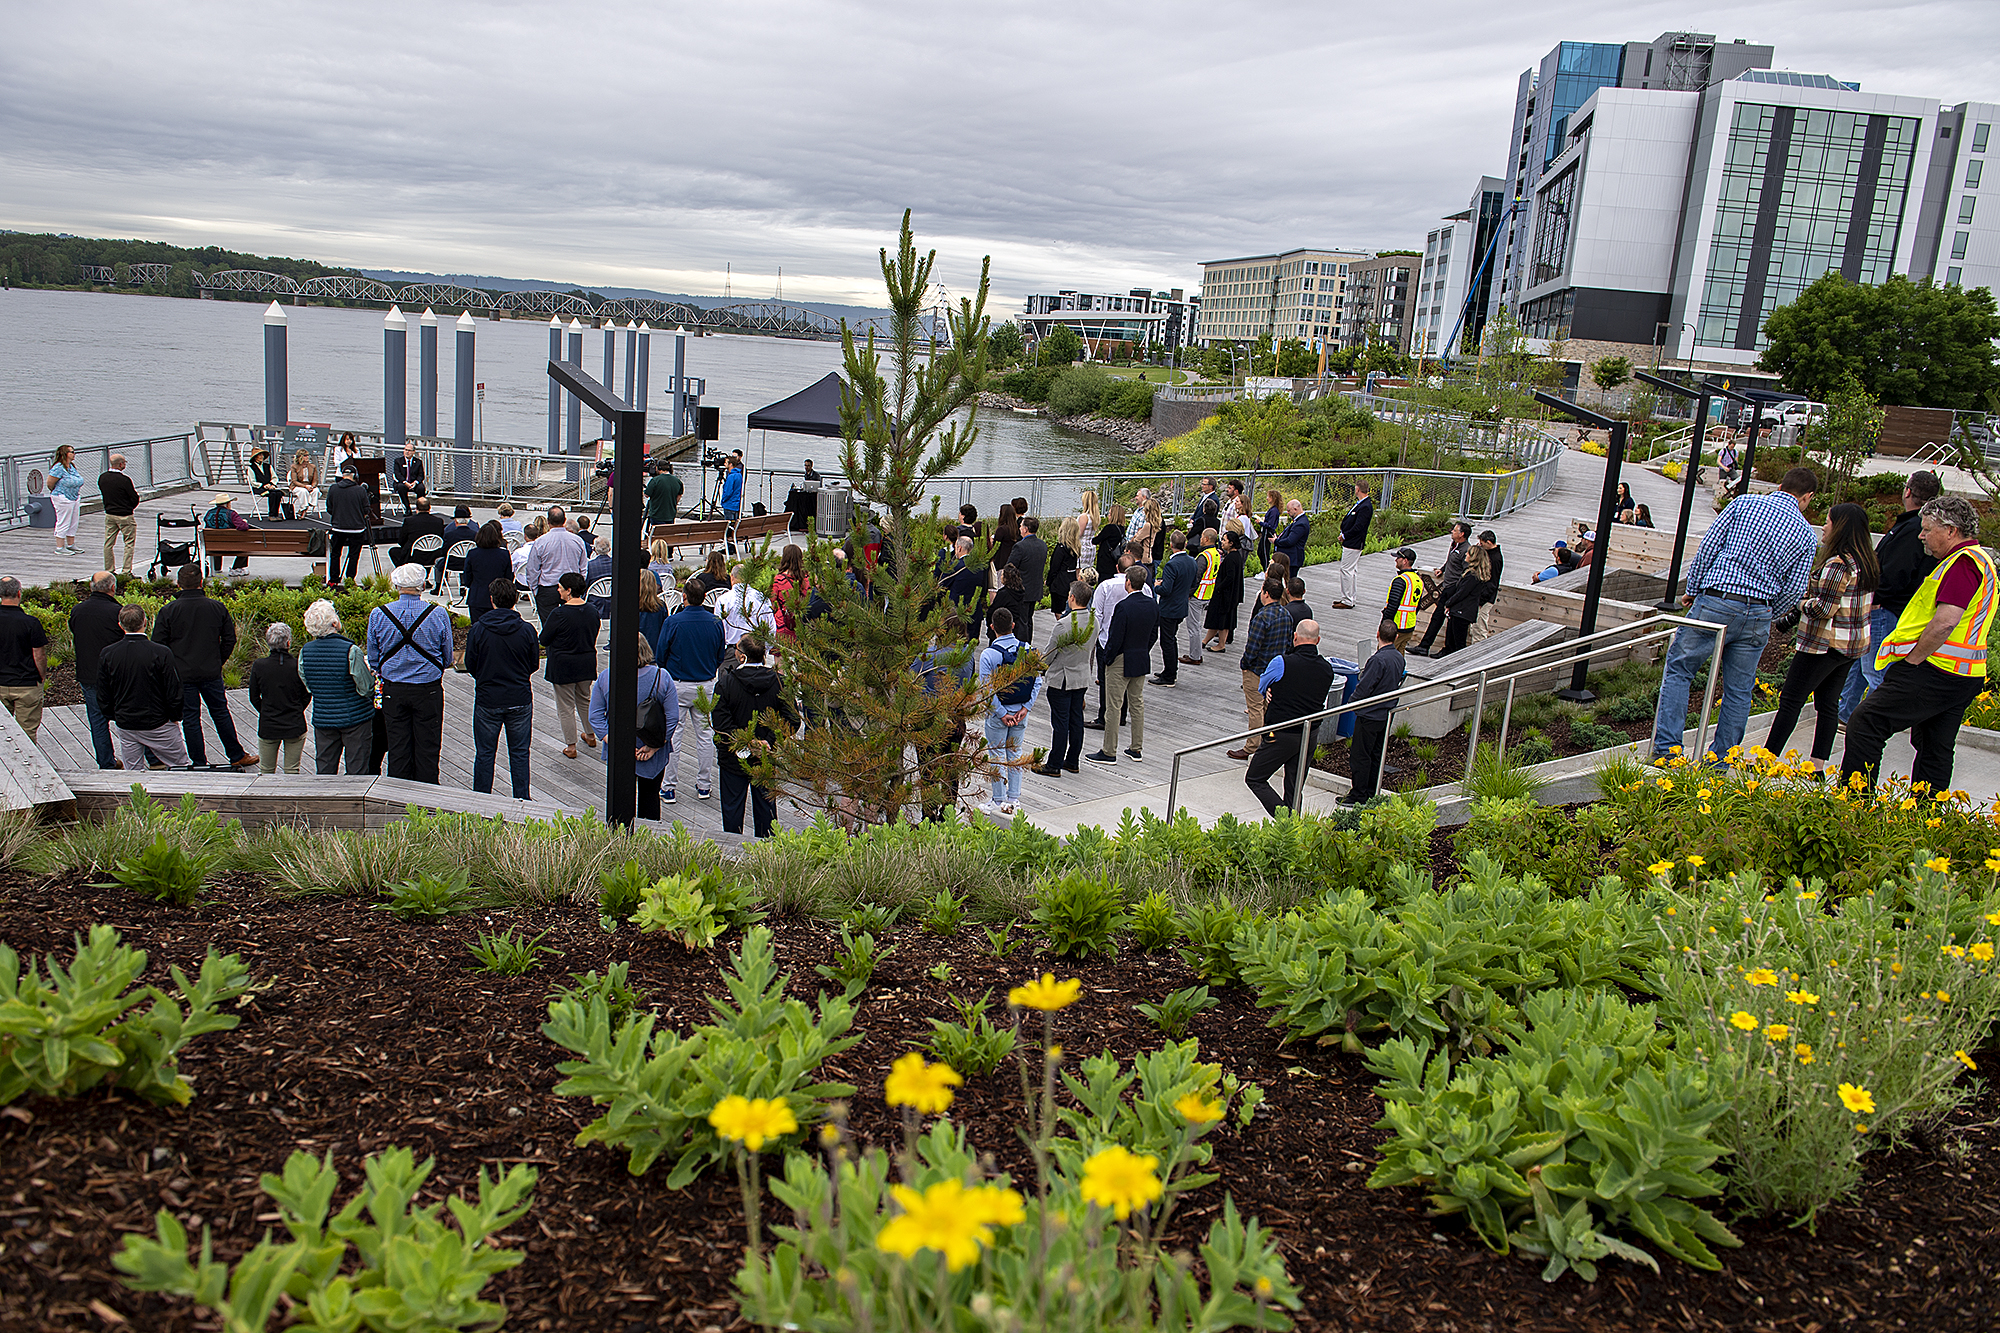 Julianna Marler, CEO of the Port of Vancouver USA, speaks to the crowd as they gather to celebrate the opening of the new Vancouver Landing, which is a part of the Terminal 1 development, at the Waterfront Vancouver, on Thursday morning, June 9, 2022.